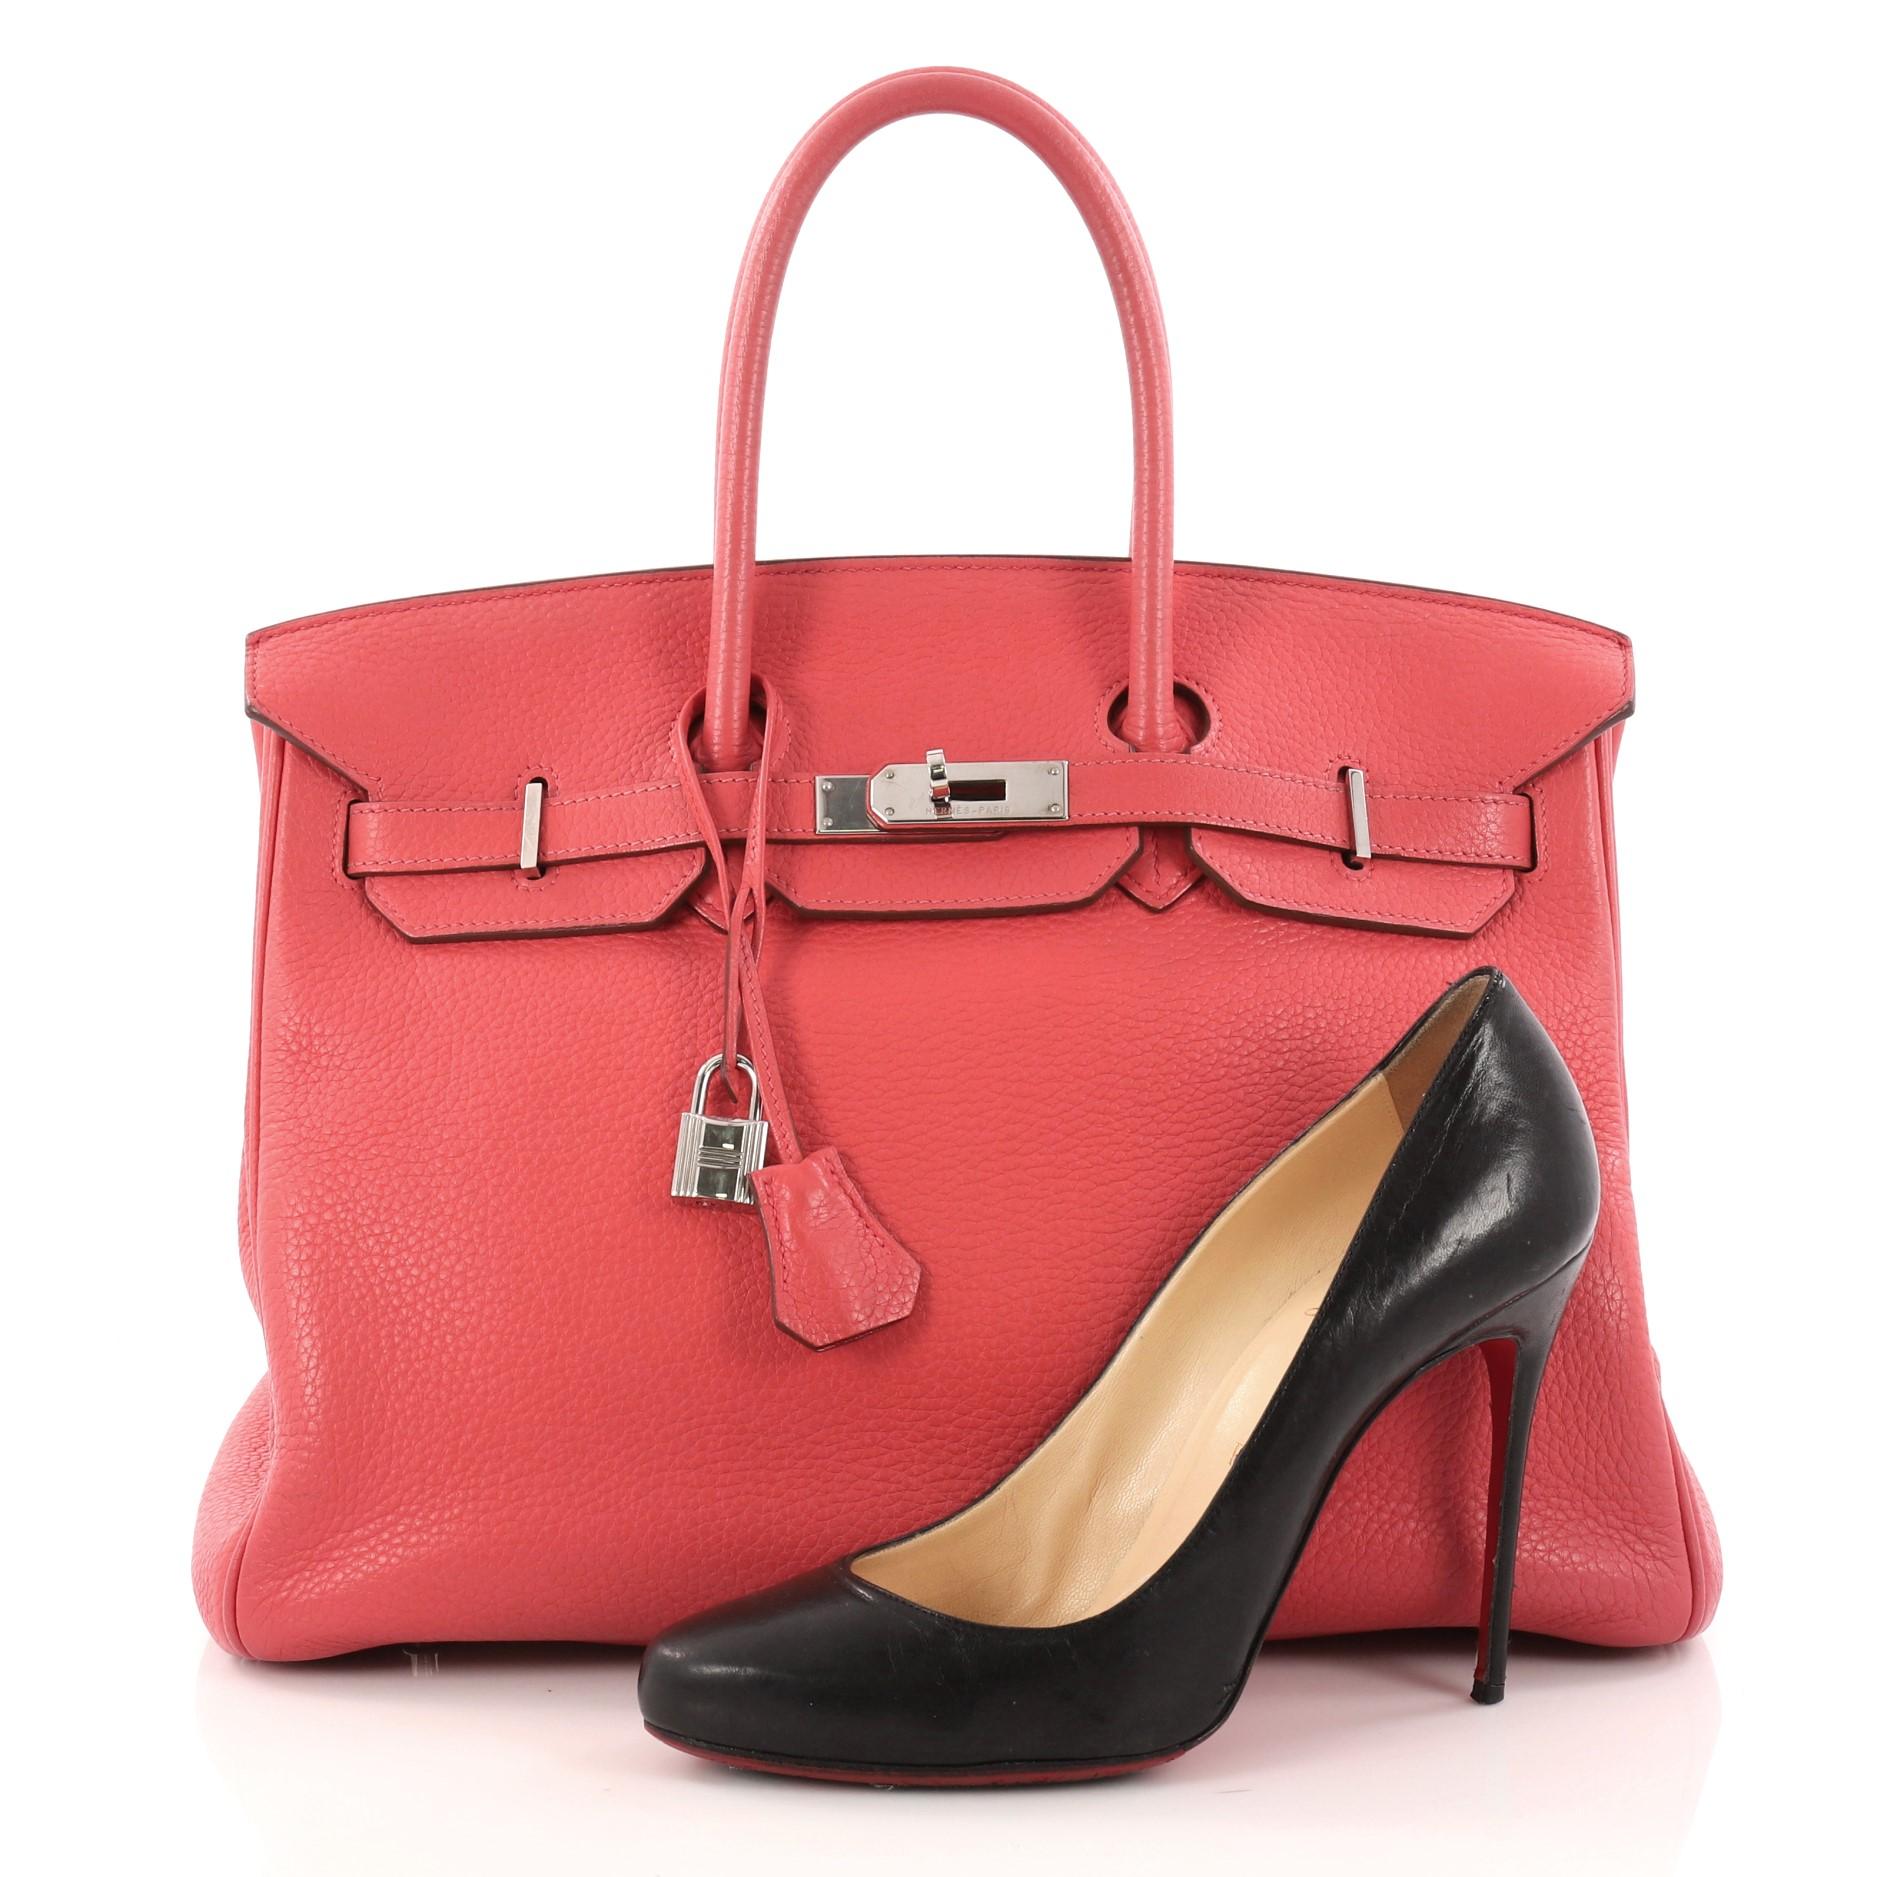 This authentic Hermes Birkin Handbag Bougainvillea Clemence with Palladium Hardware 35 is synonymous to traditional Hermes luxury. Crafted with sturdy, scratch-resistant Bougainvillea clemence leather, this eye-catching luxurious tote is accented